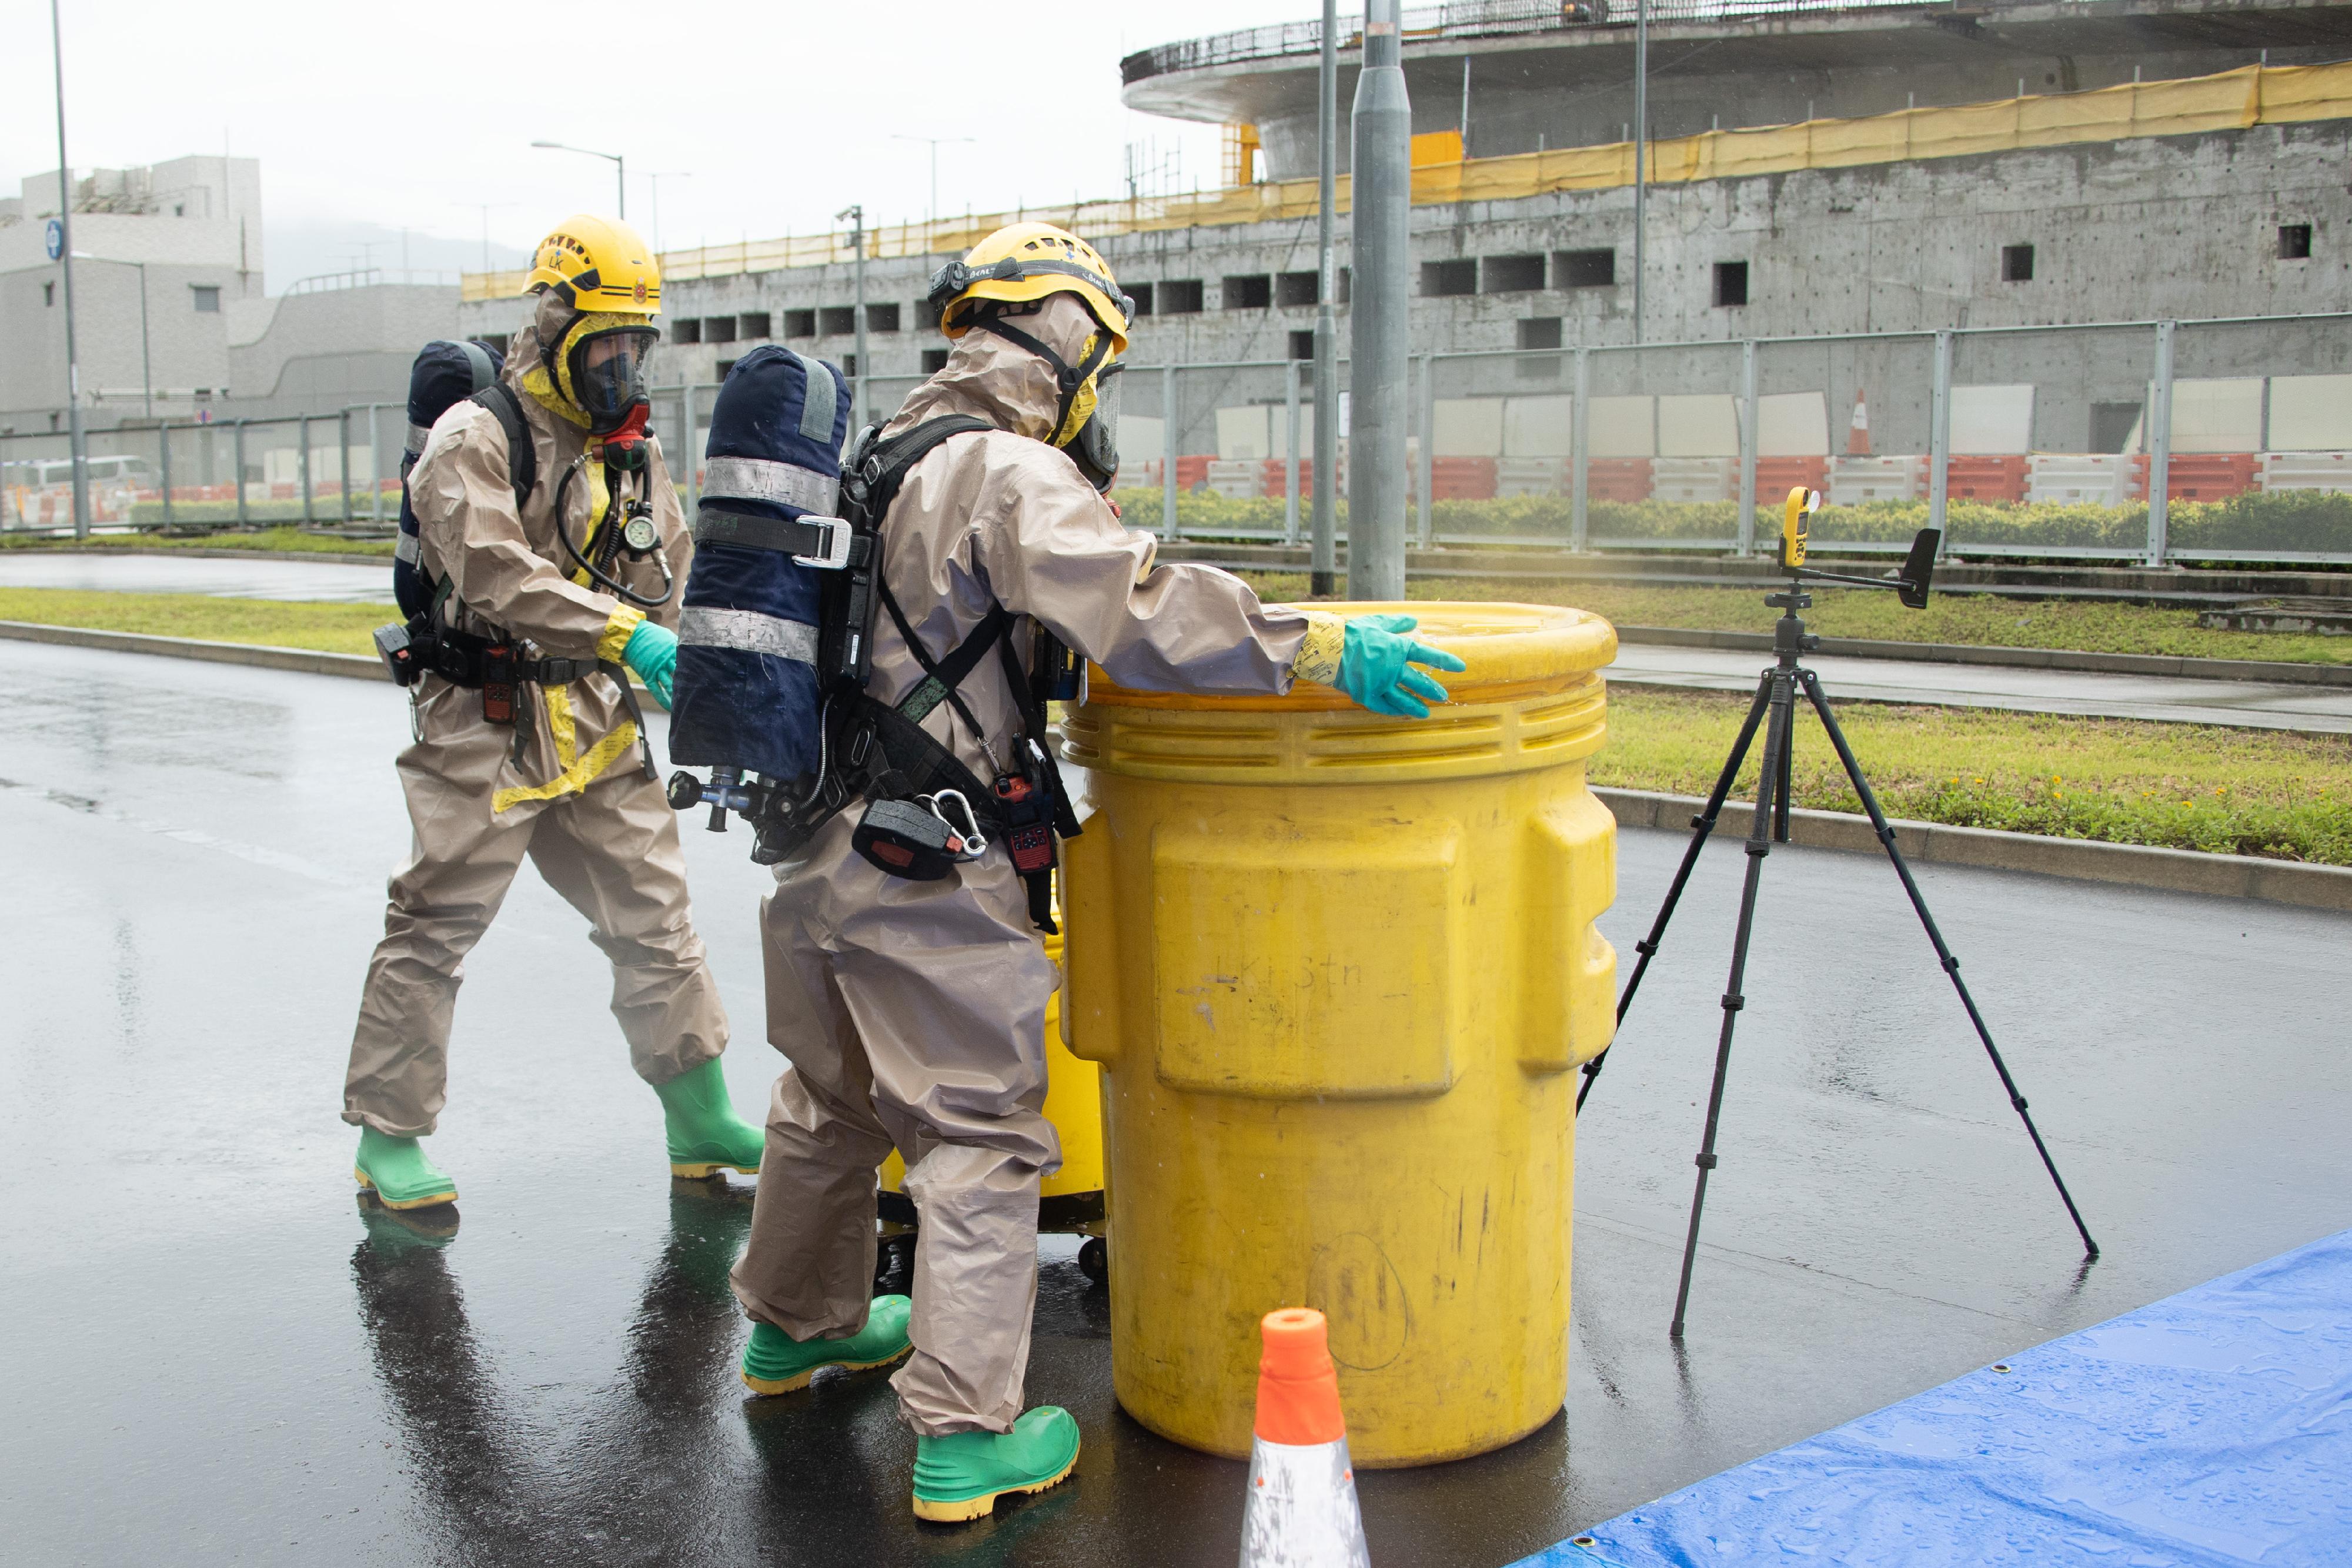 The Fire Services Department (FSD) and the Hong Kong Police Force jointly held a counter-terrorism and hazardous material incident exercise code-named "DEFENCE" this morning (May 31) at the cross-boundary coach parking bay outside the Passenger Clearance Building of the Hong Kong-Zhuhai-Macao Bridge Hong Kong Port. Photo shows FSD officers wearing Level B chemical protection suits handling chemicals at the scene in the simulation.